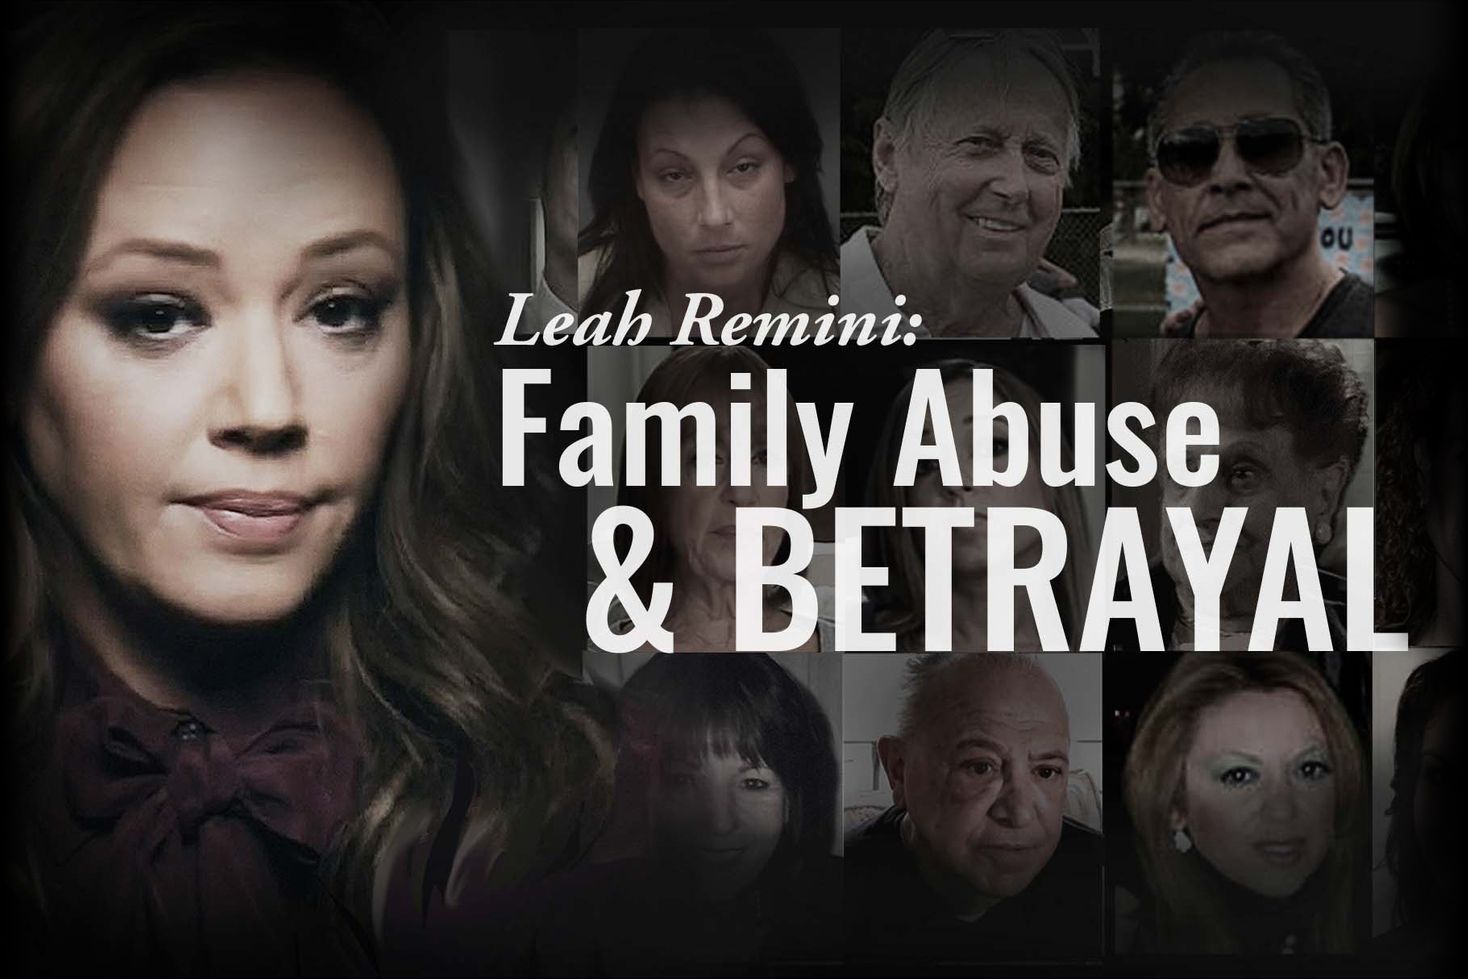 Leah Remini S Father Responds The Truth “has Got To Come Out”